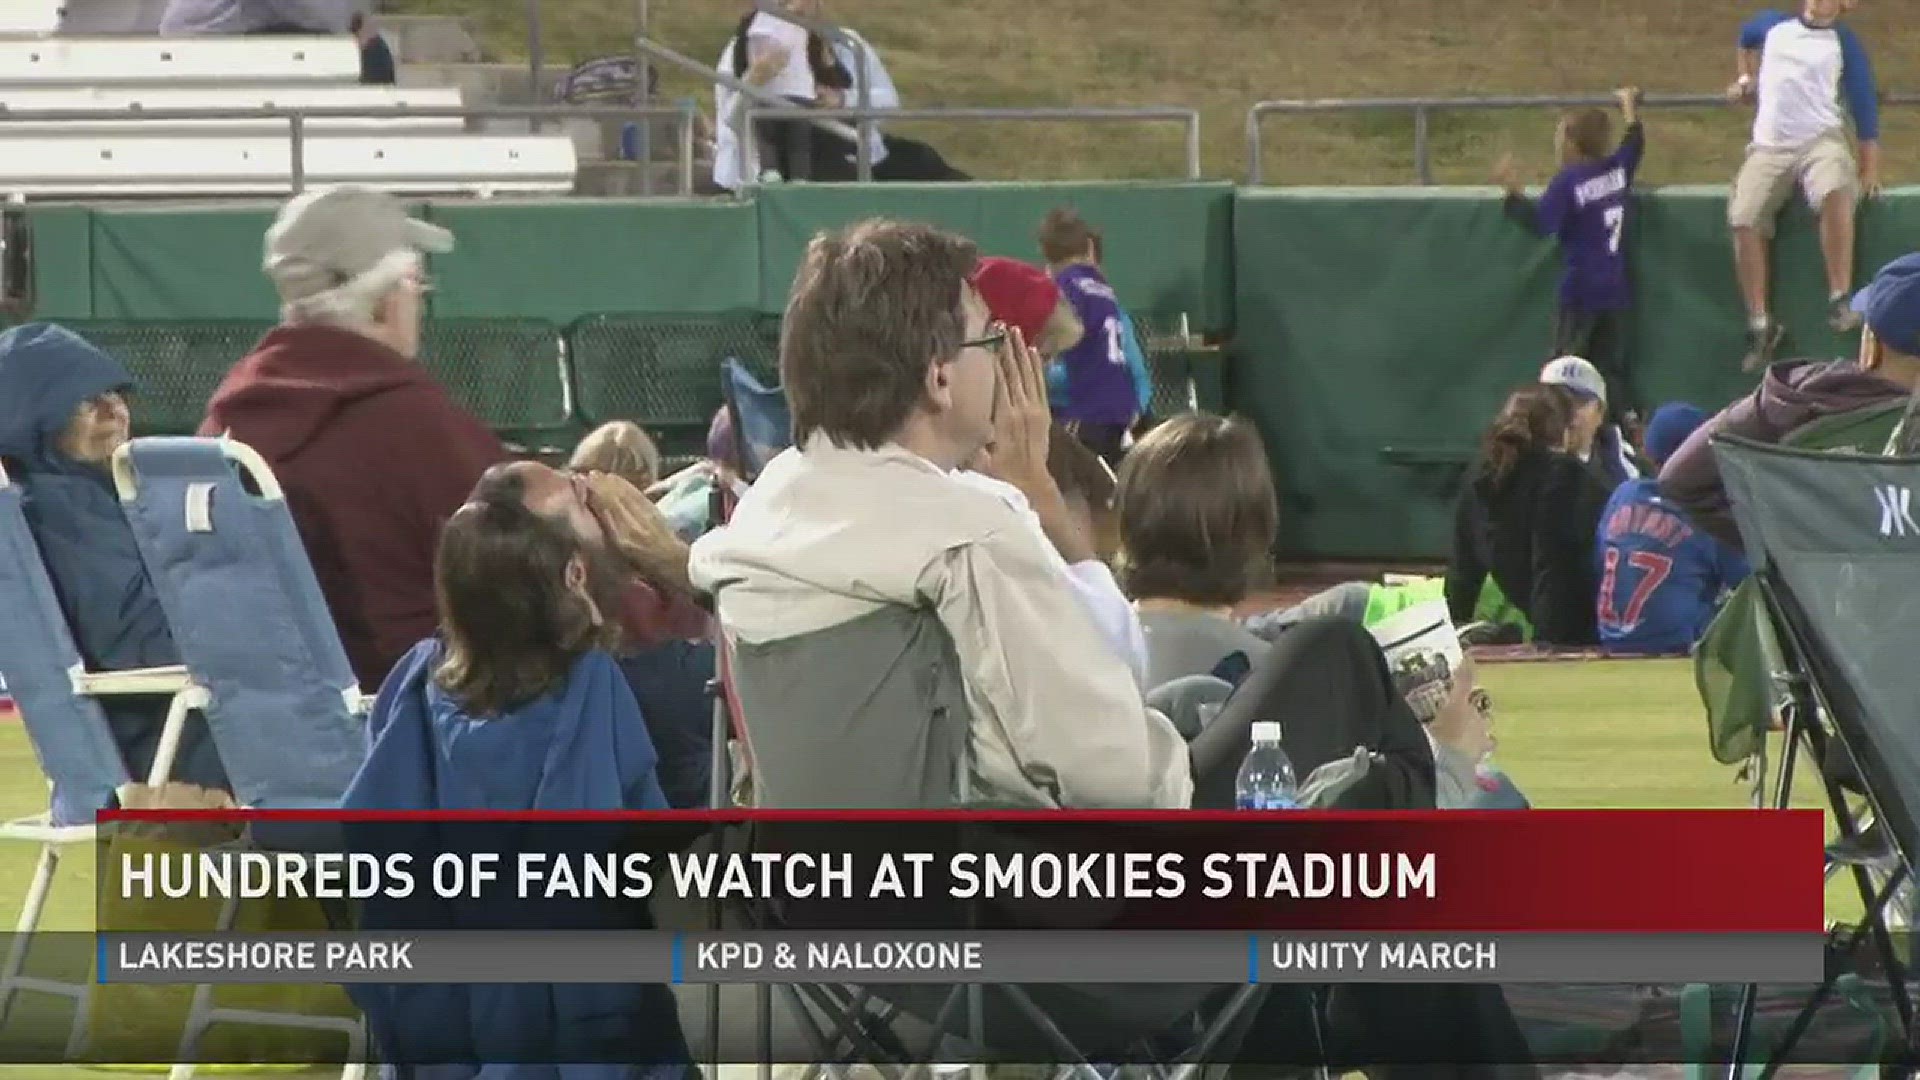 Oct. 28, 2016: About 700 fans watched Game 3 of the World Series at Smokies Stadium.